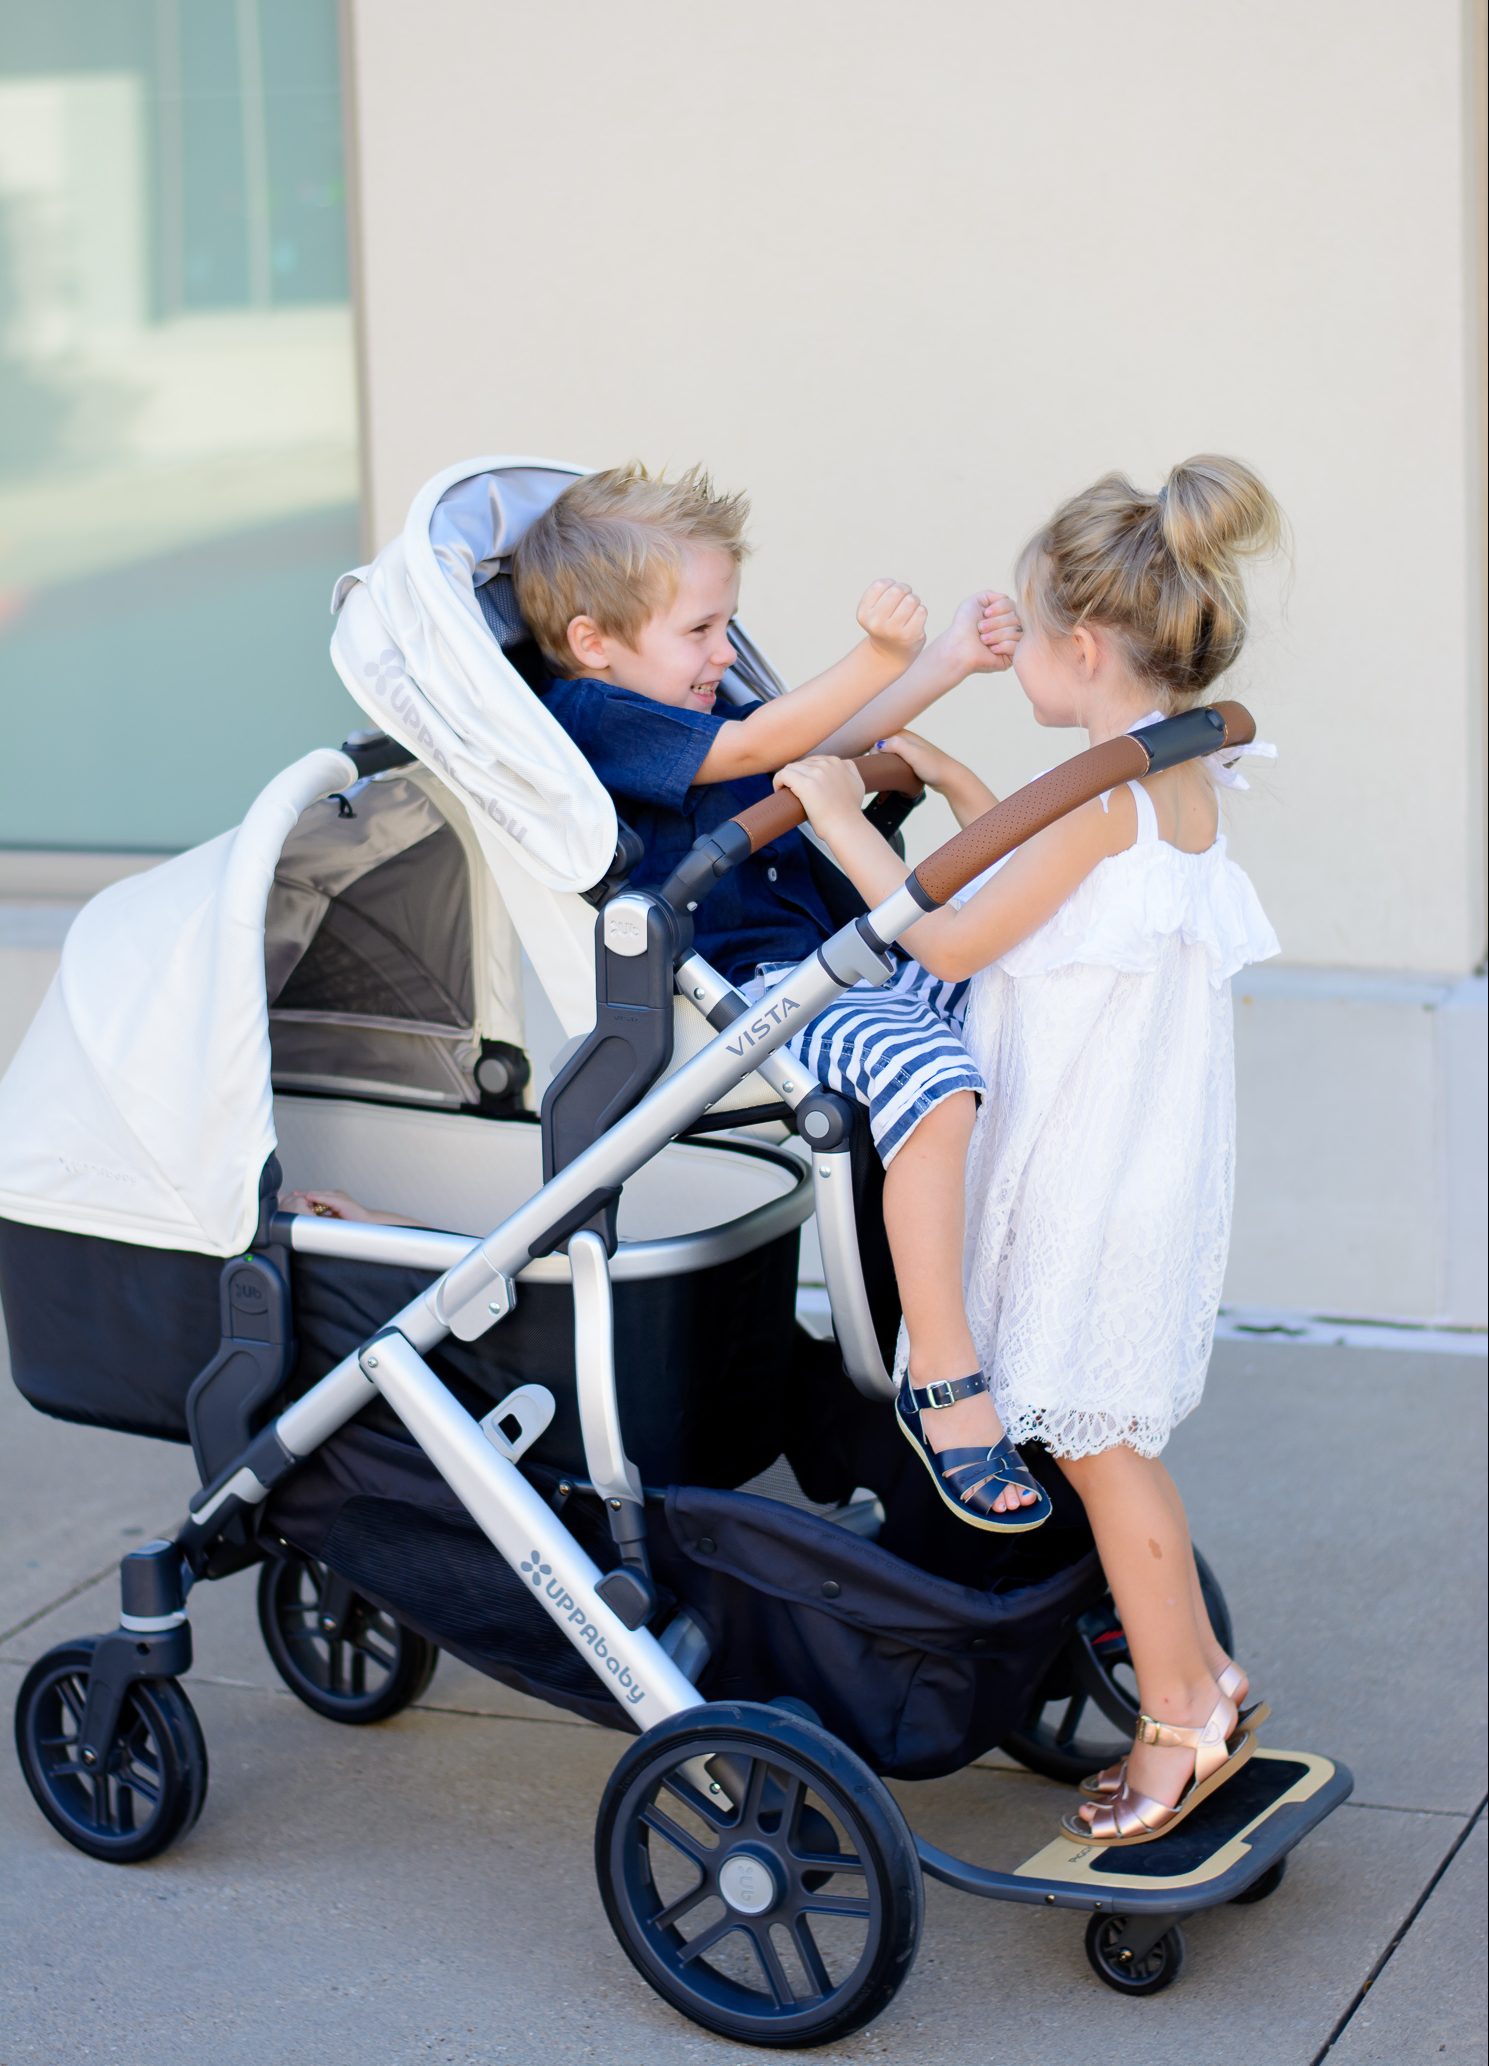 uppababy stroller for 3